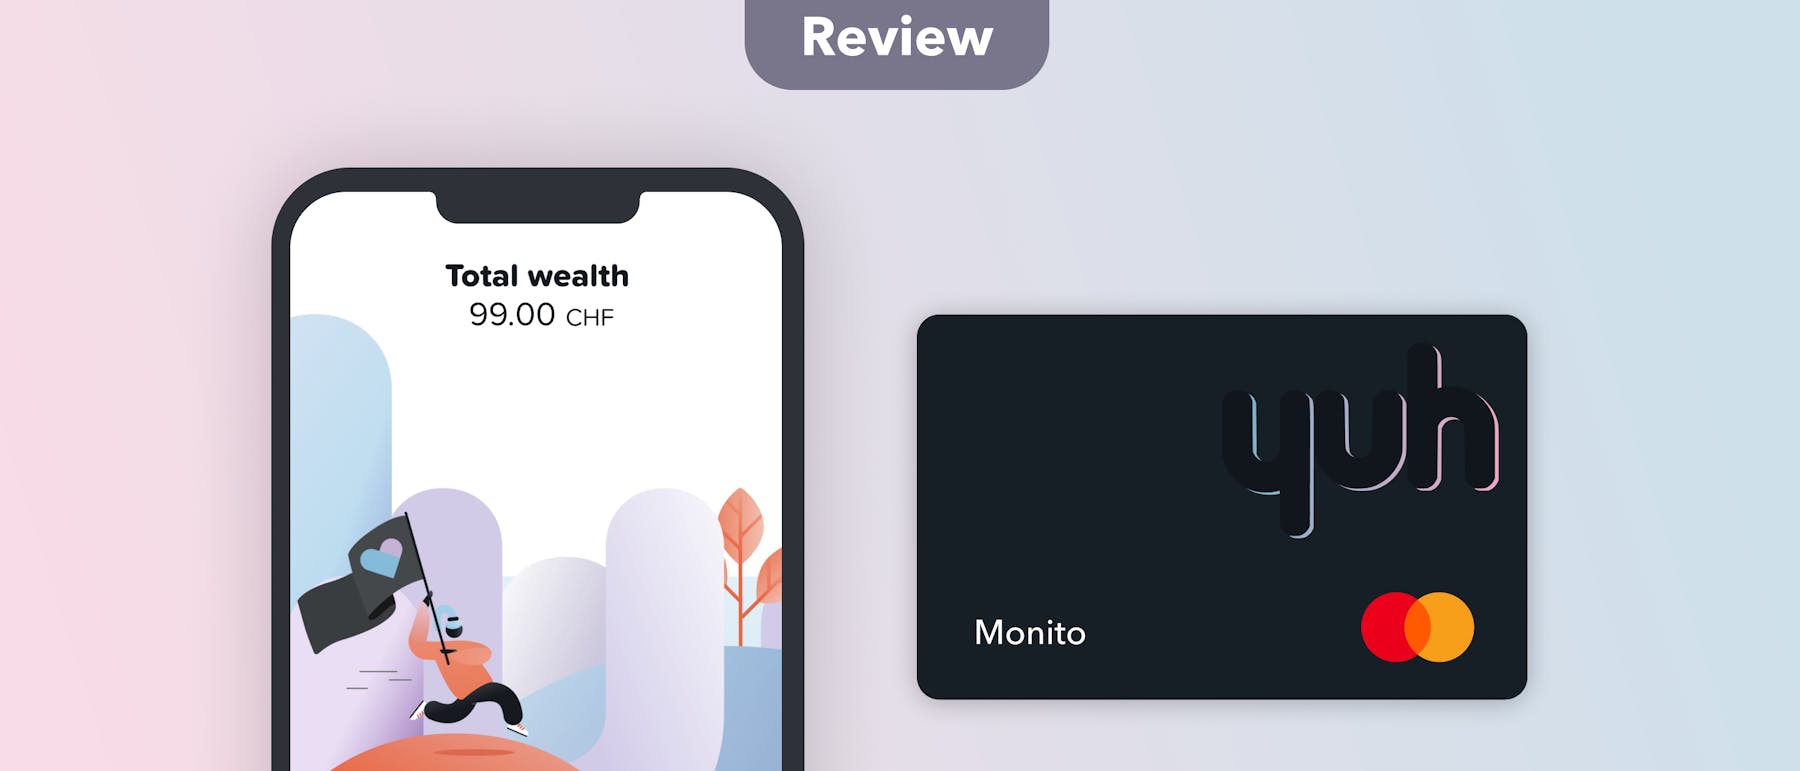 Yuh Review by Monito